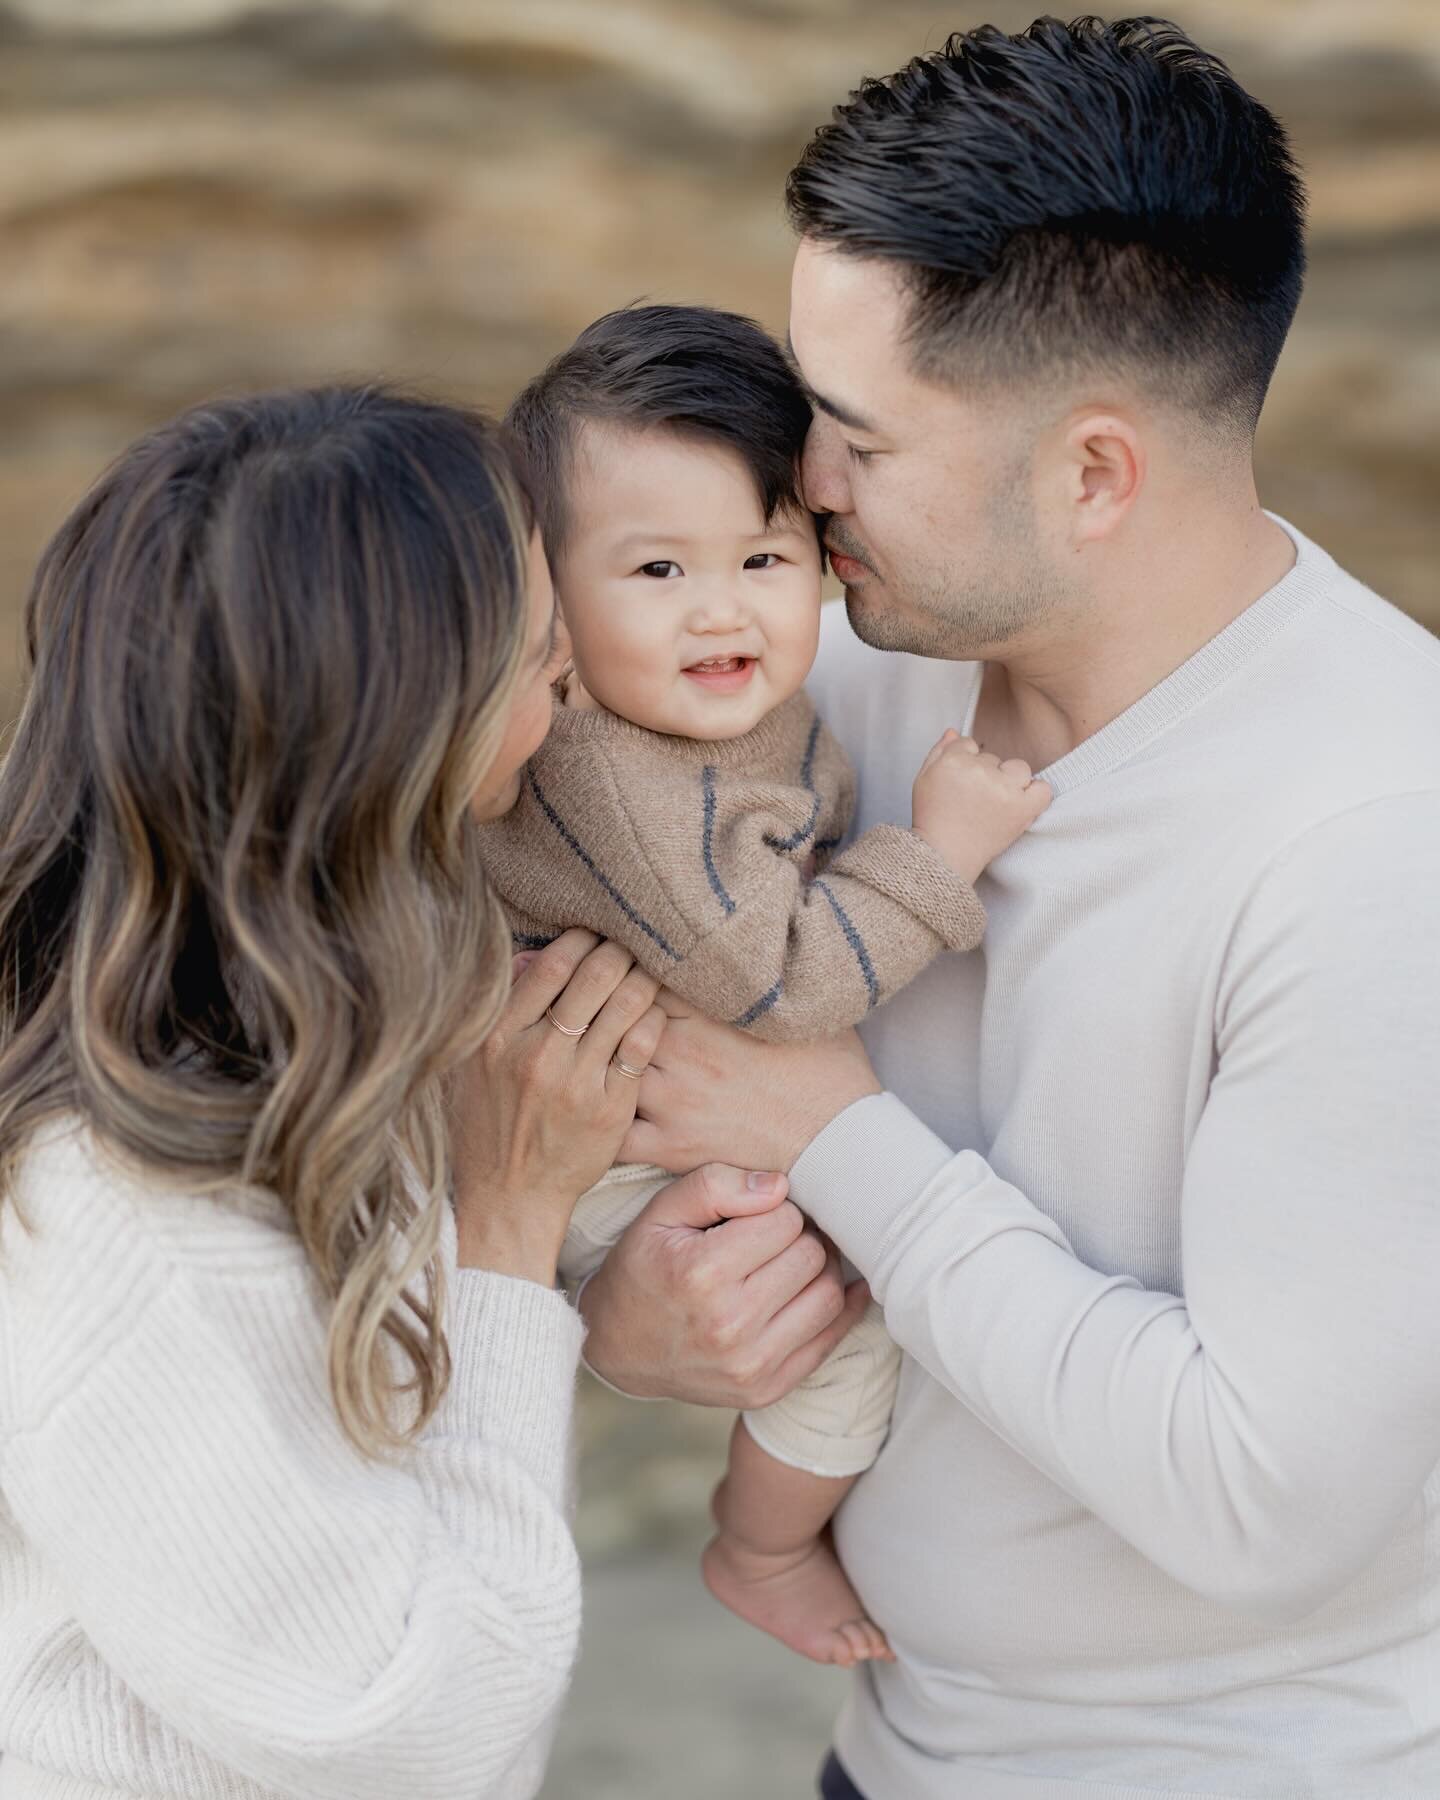 &lsquo;Tis the season for family. Remember to take the time to be present for the baby giggles, the tiny toes, and warm snuggles. These are the things that make this time extra special. #ocfamilyphotographer #ocfamily #newportfamilyphotographer